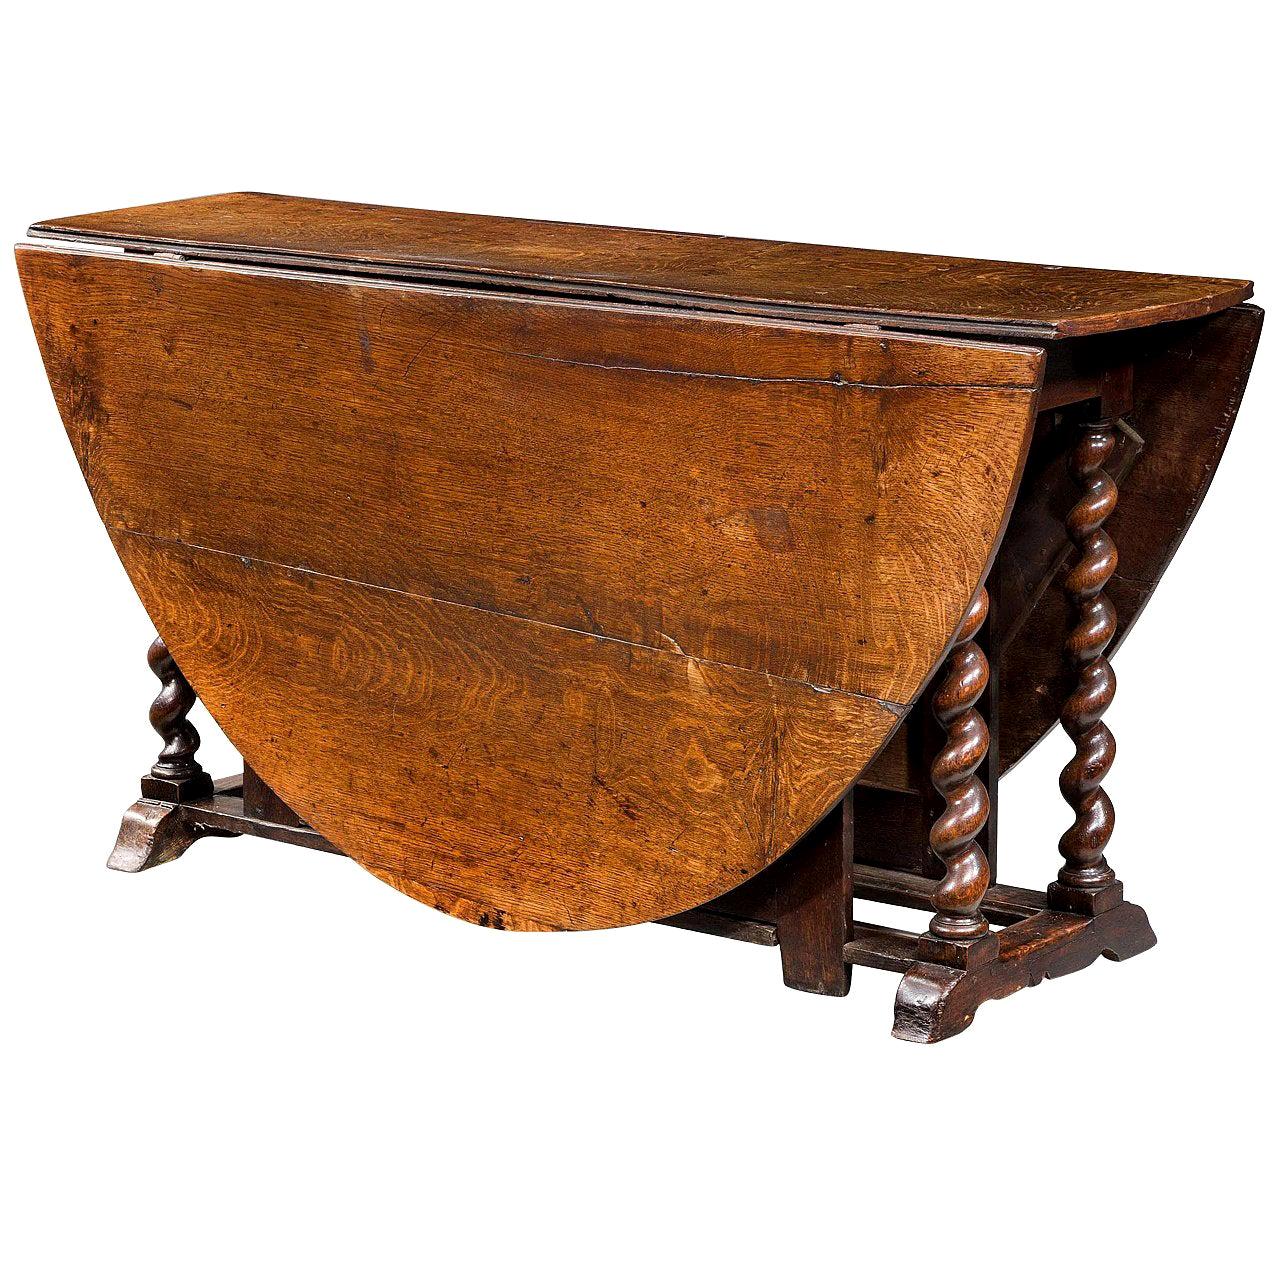 William and Mary Period Gate Leg Table